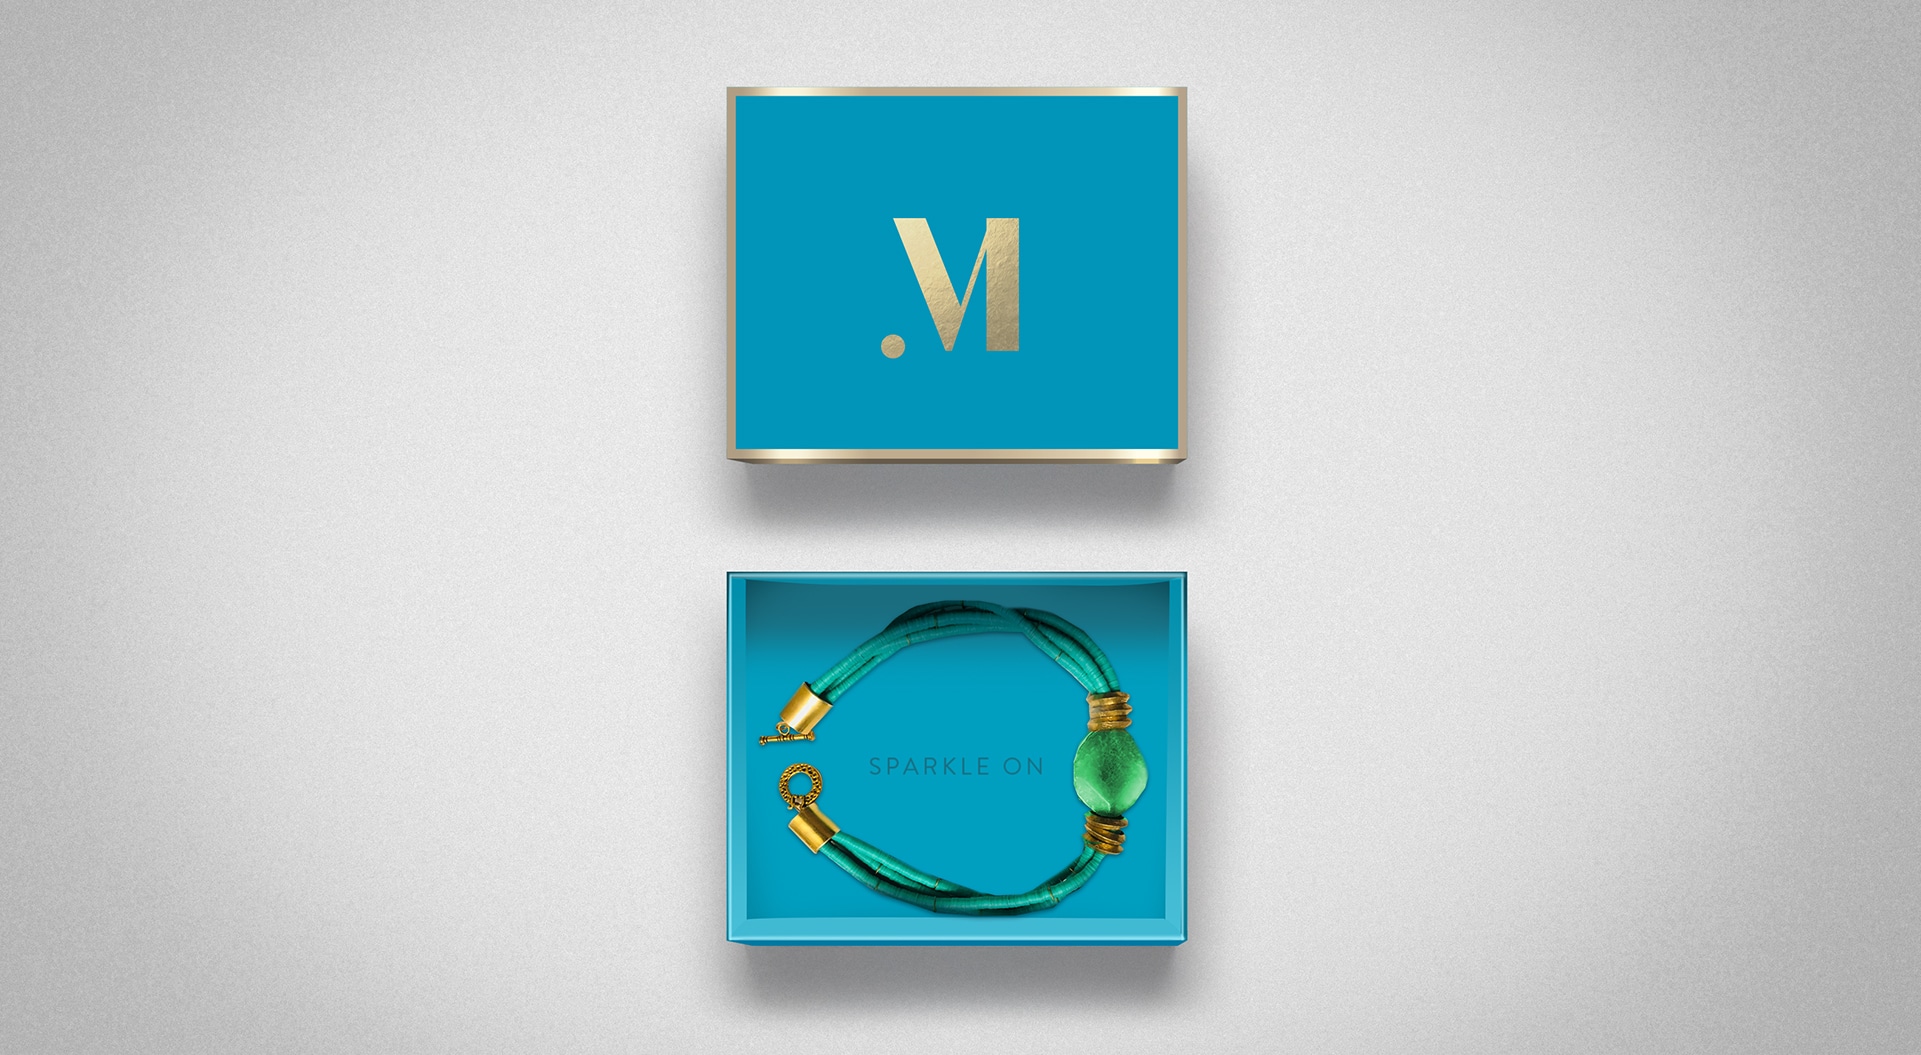 Teal and gold packaging design